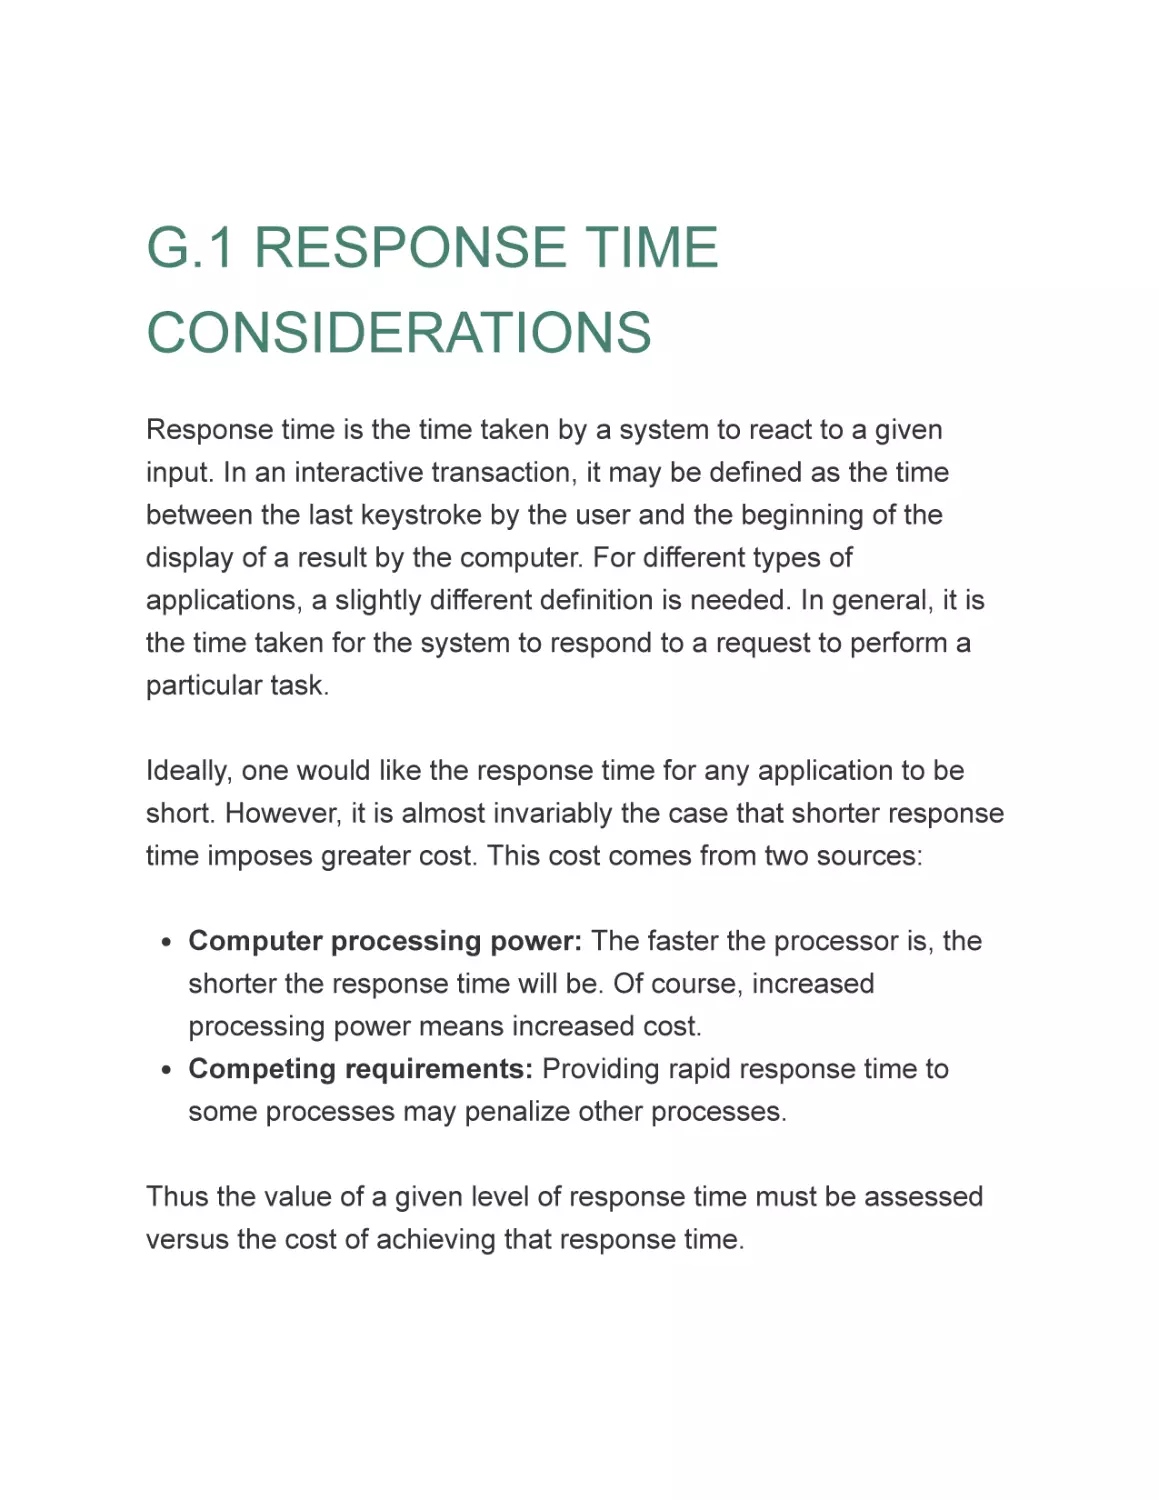 G.1 RESPONSE TIME CONSIDERATIONS